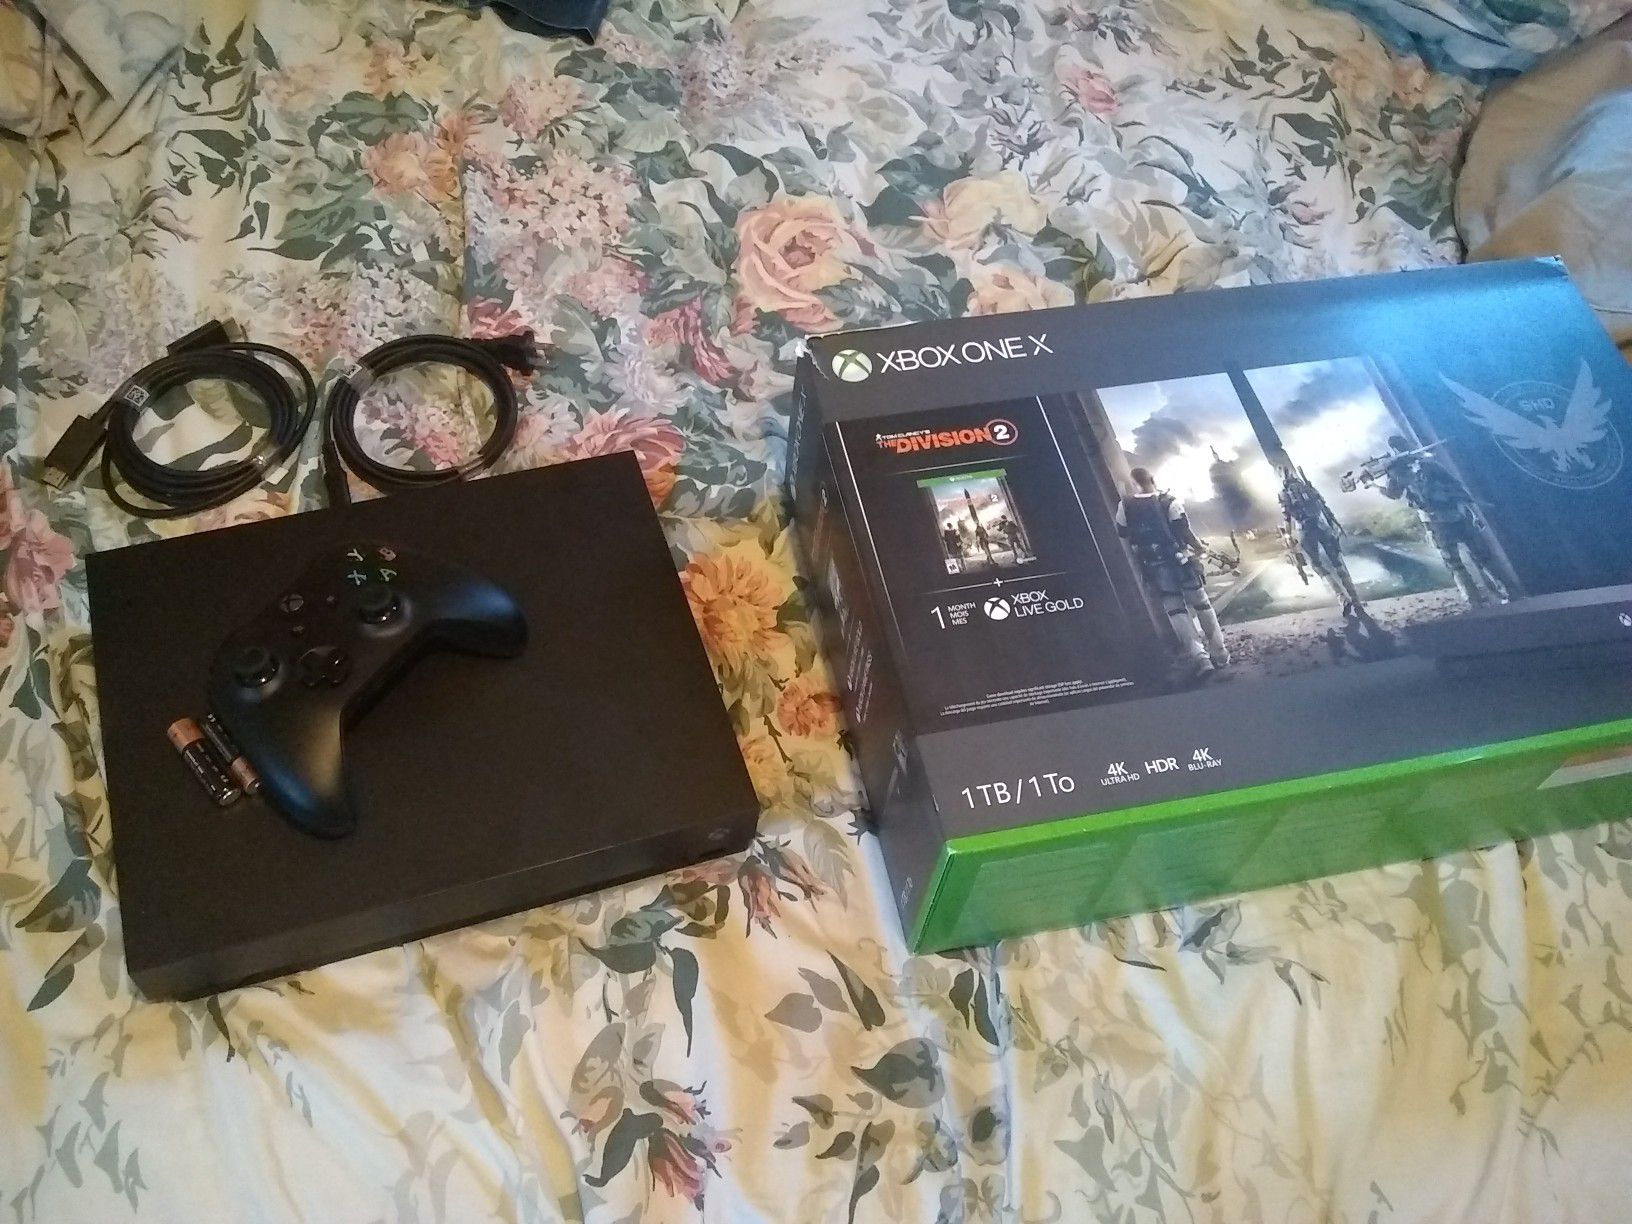 Xbox one x 1tb bundle with Tom Clancy's Division 2